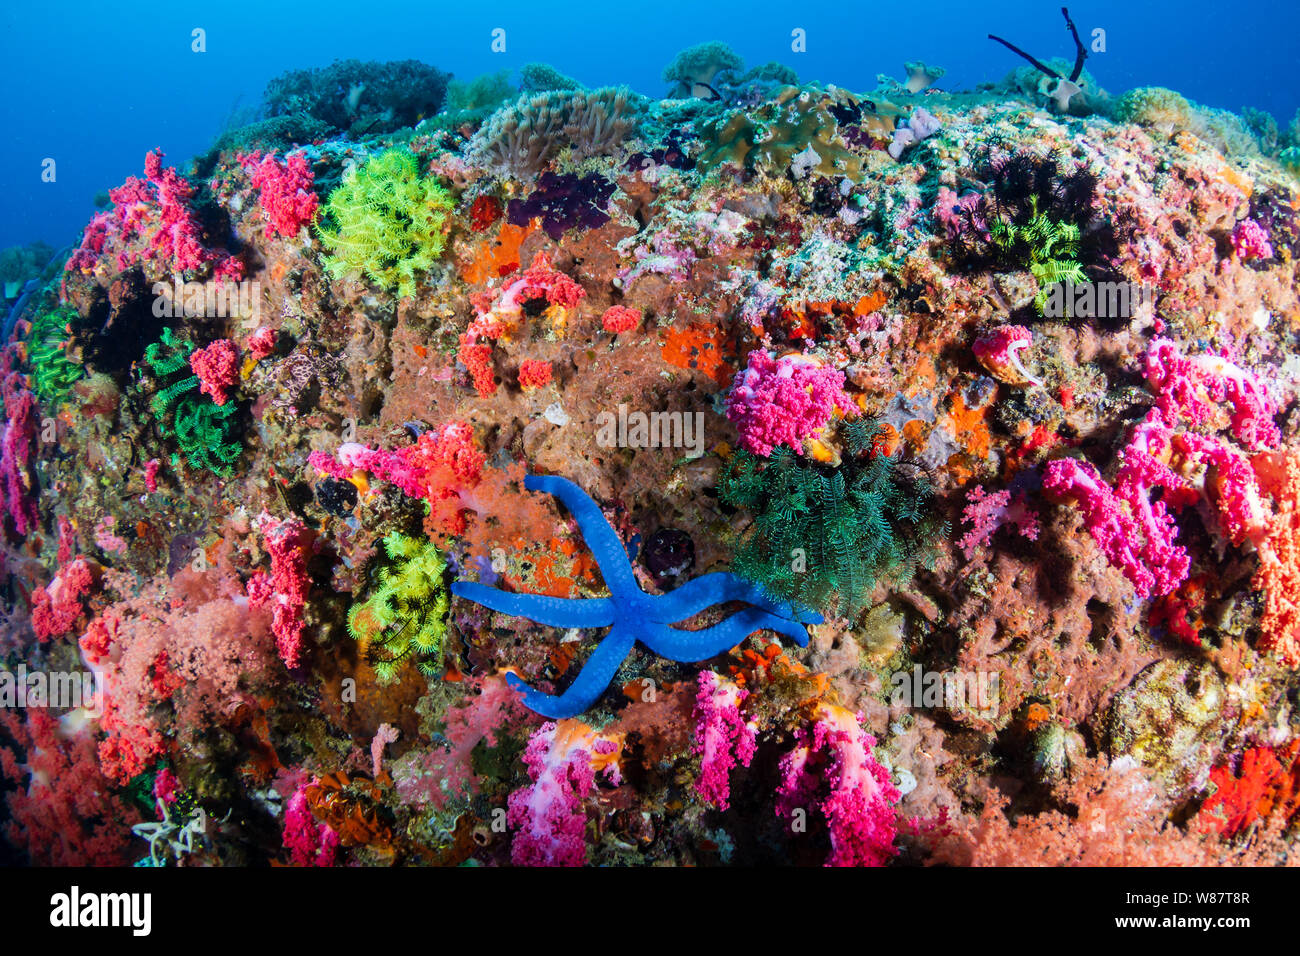 Colorful Blue Starfish and Colorful Corals on a Tropical Reef Stock Photo